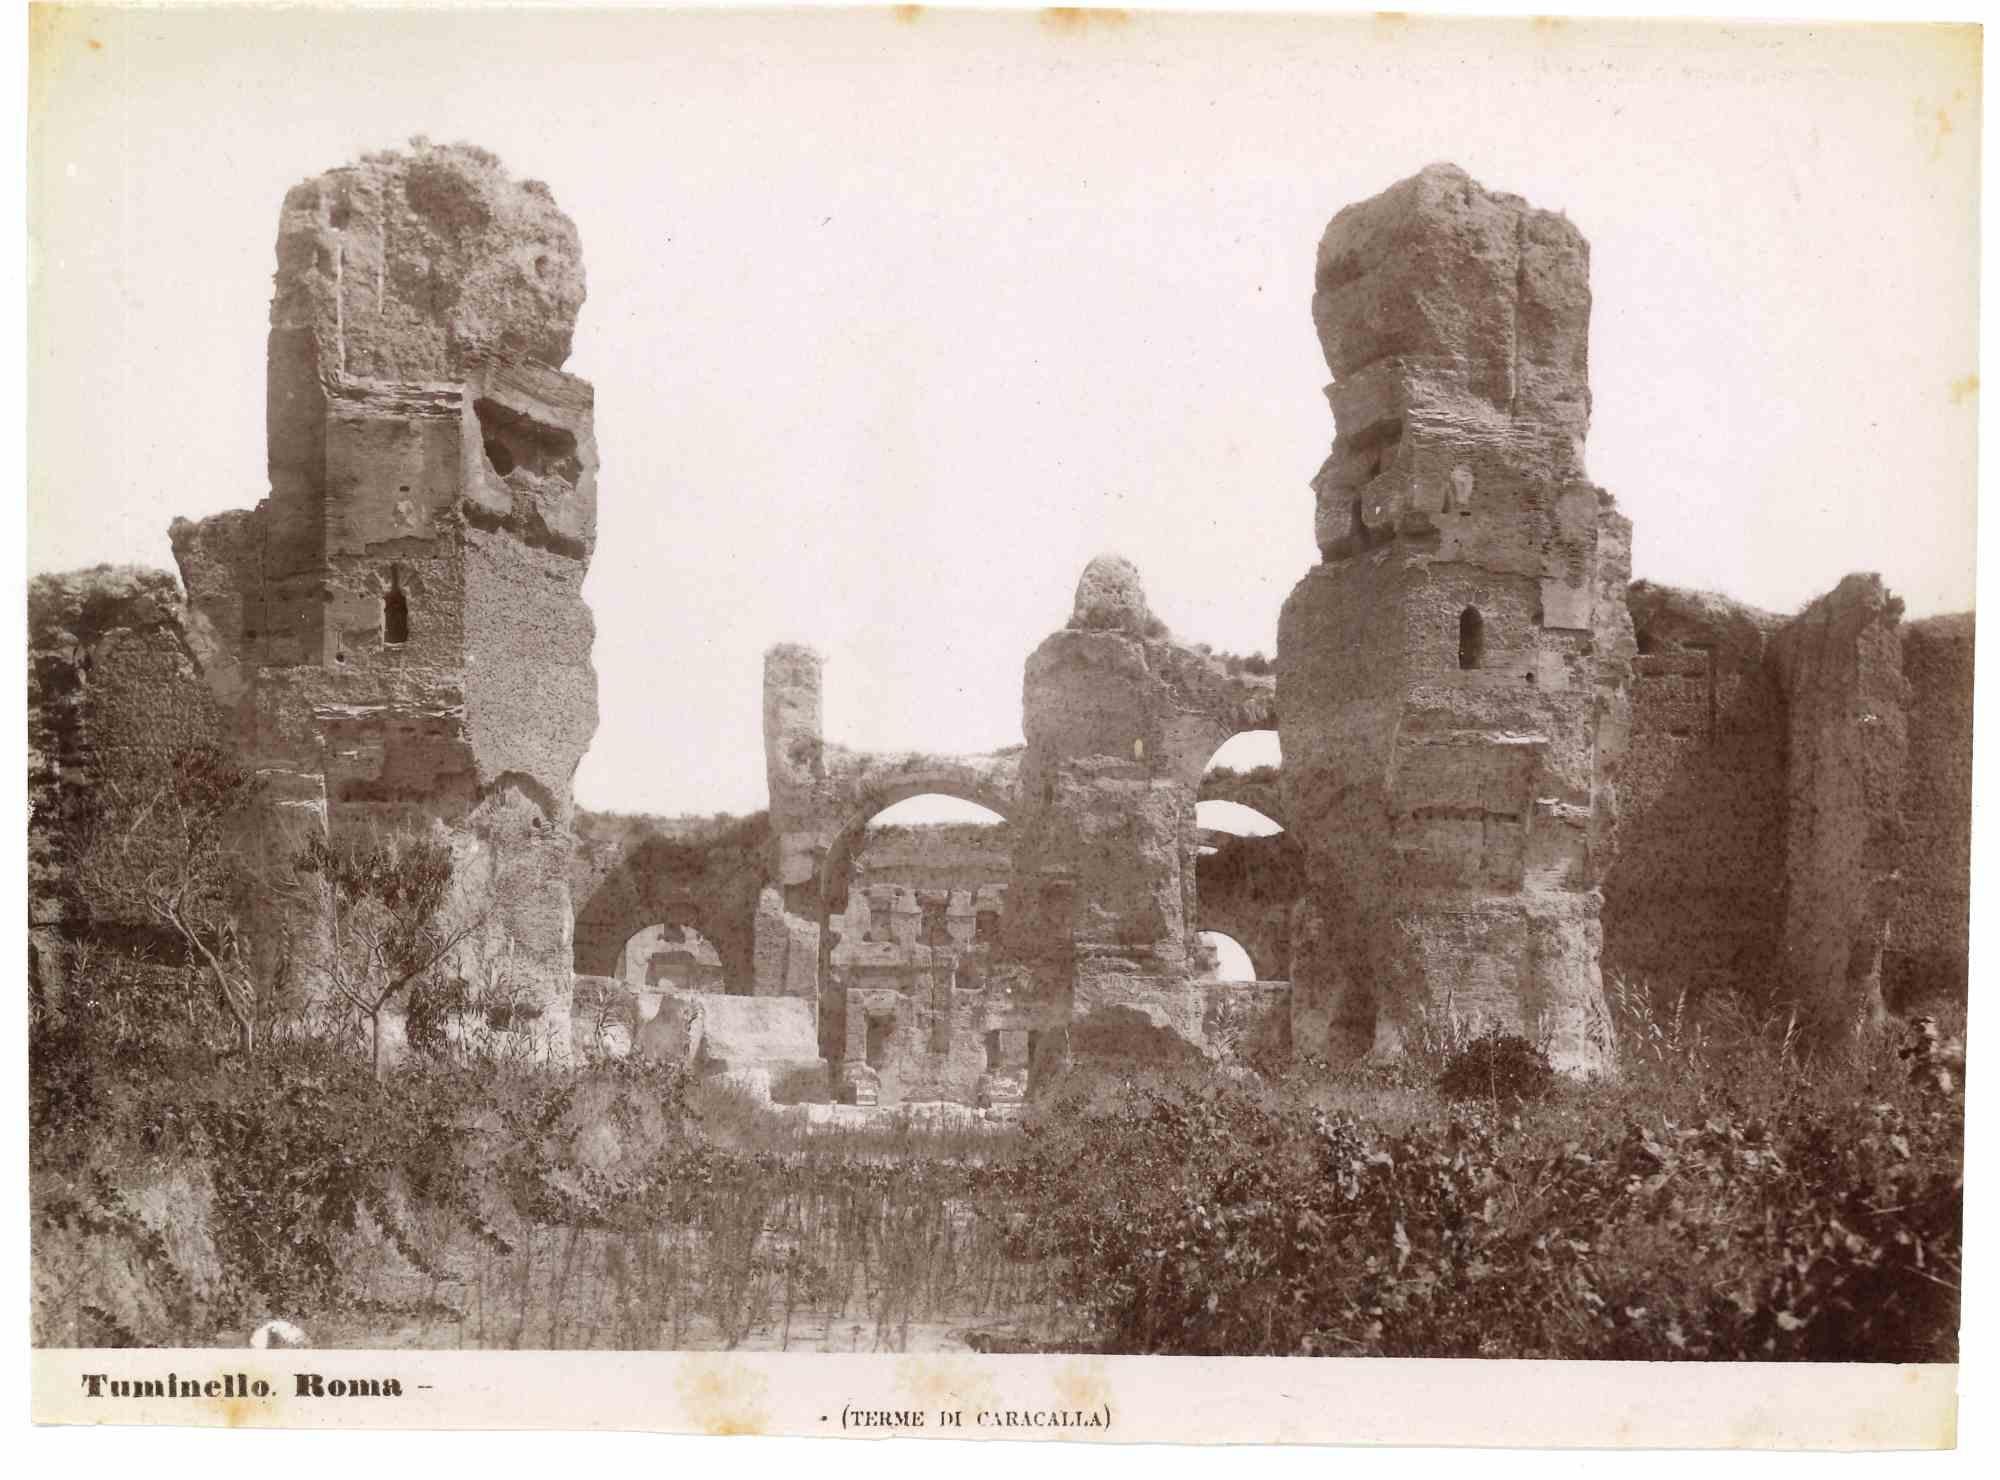 Baths of Caracalla - Vintage Photograph by Ludovico Tuminello - 20th Century